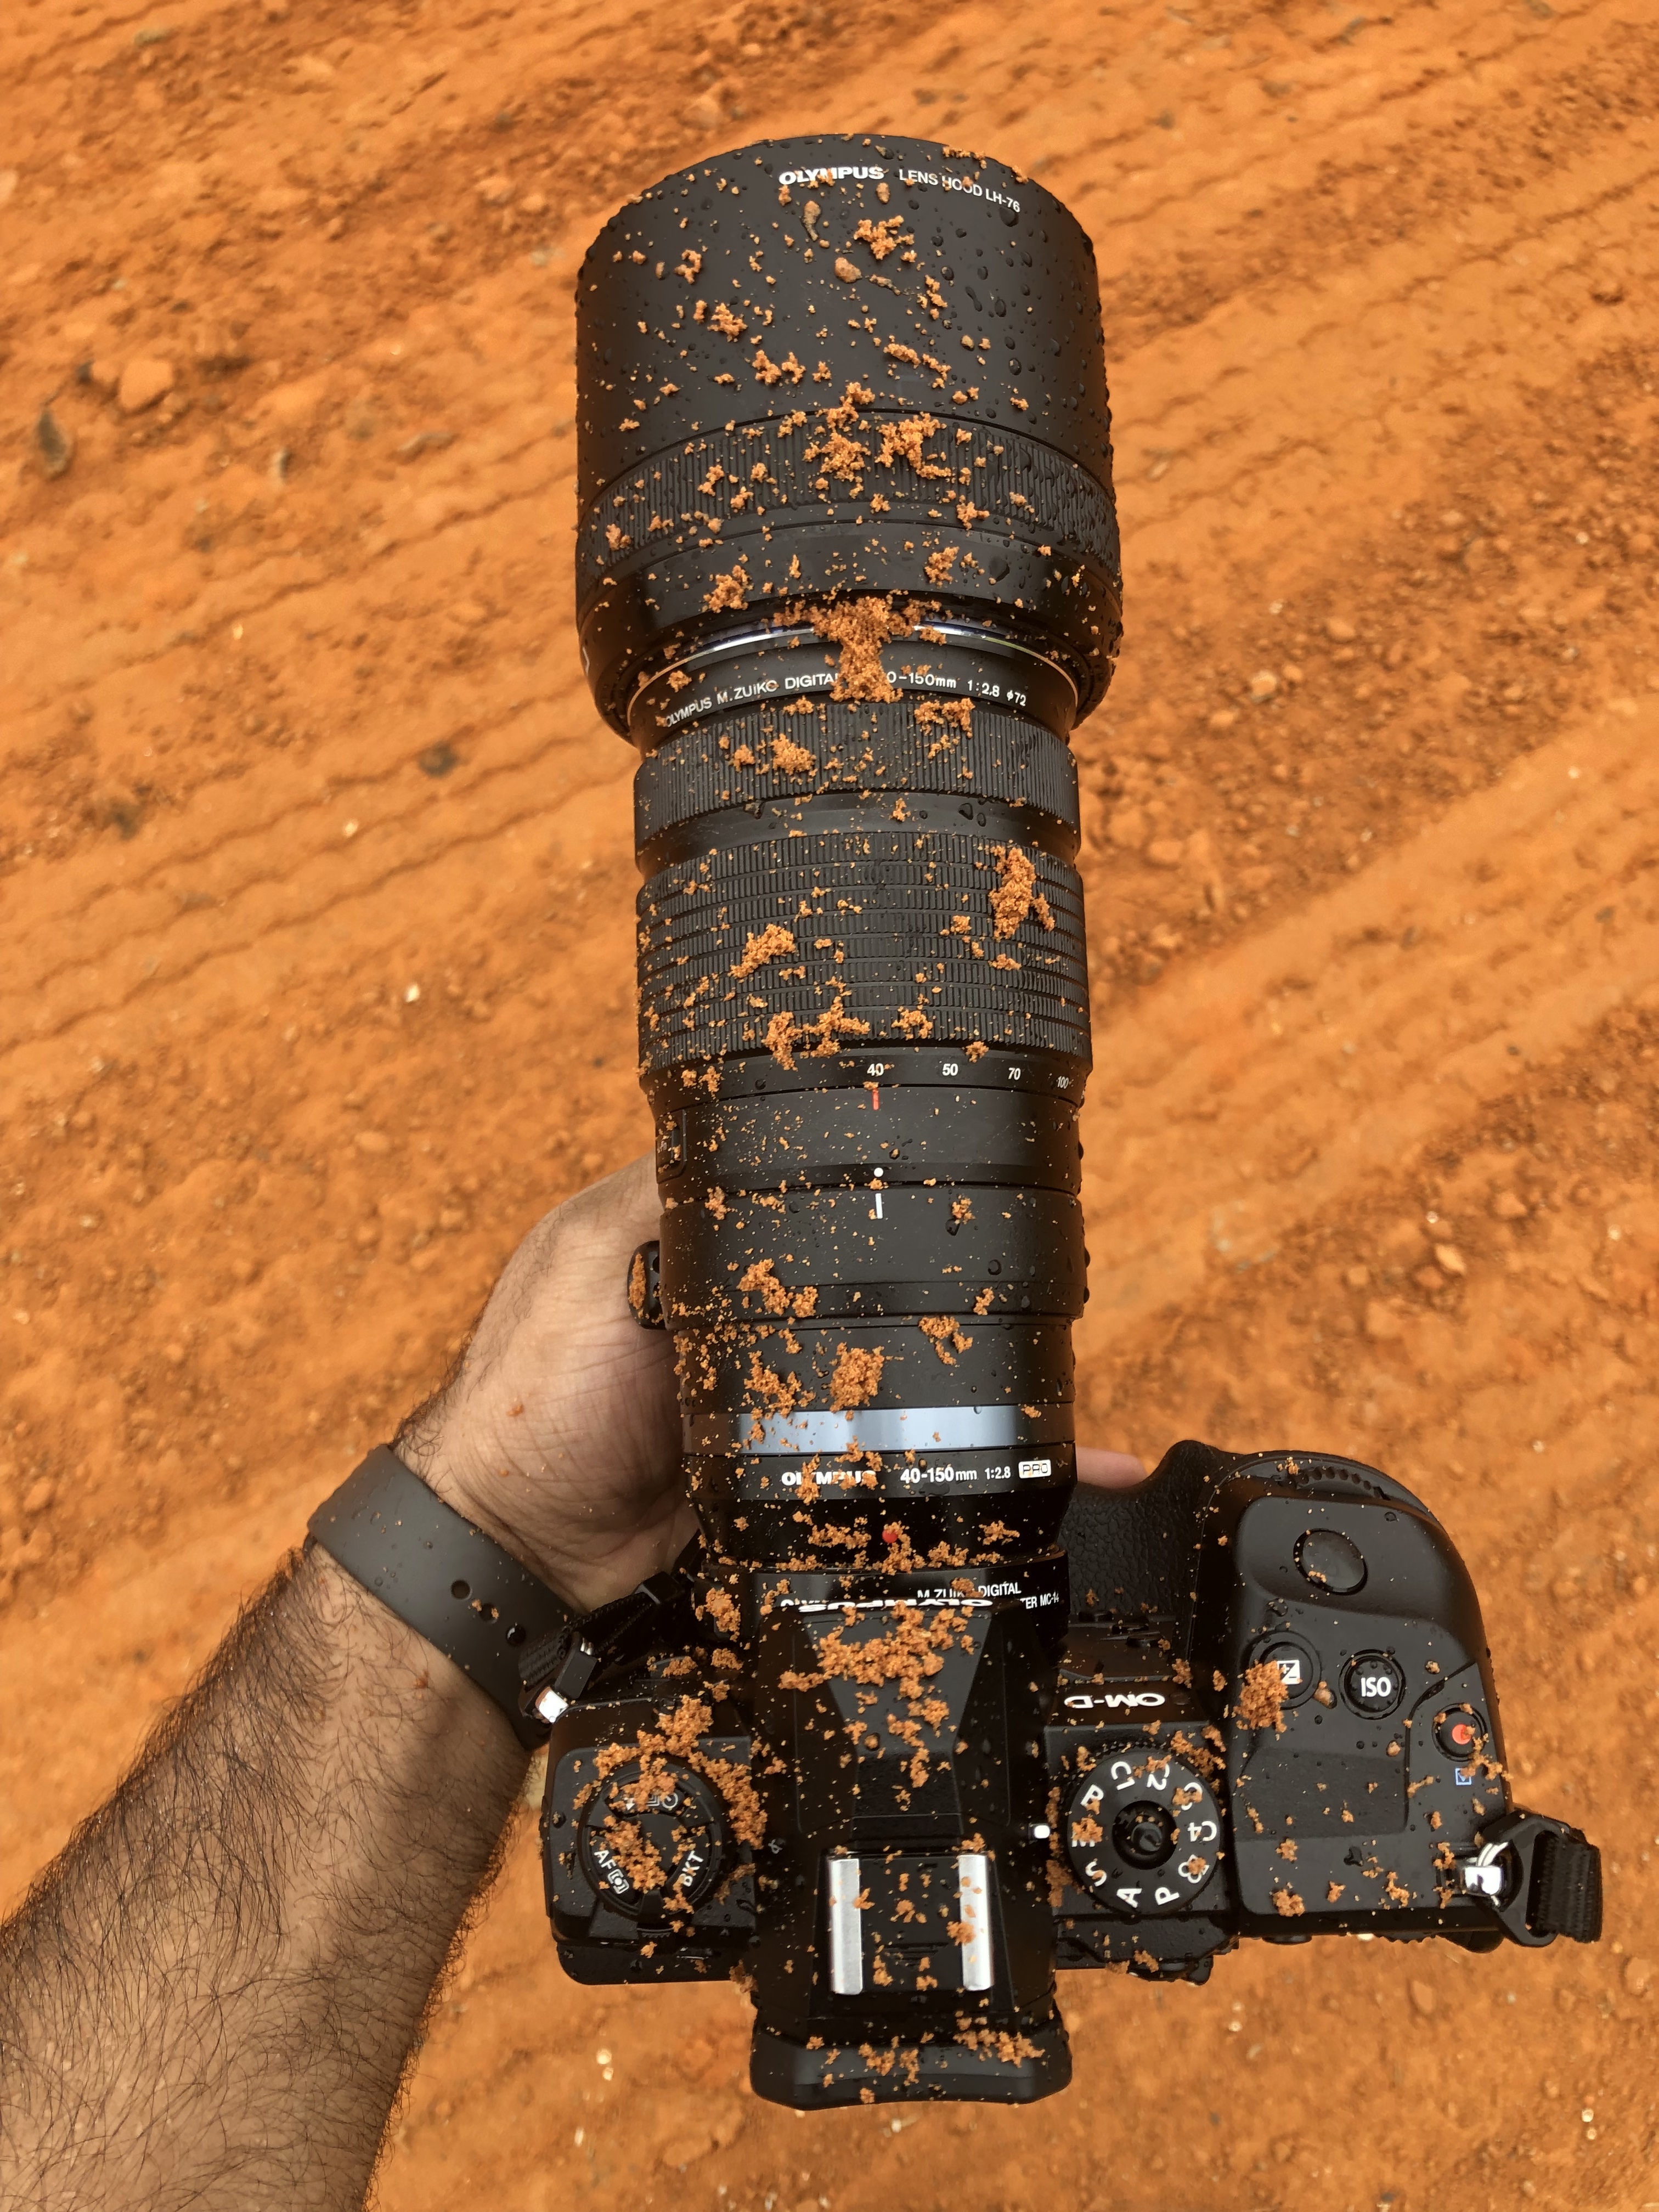 Video: Watch What we Did to the Olympus OMD EM1x